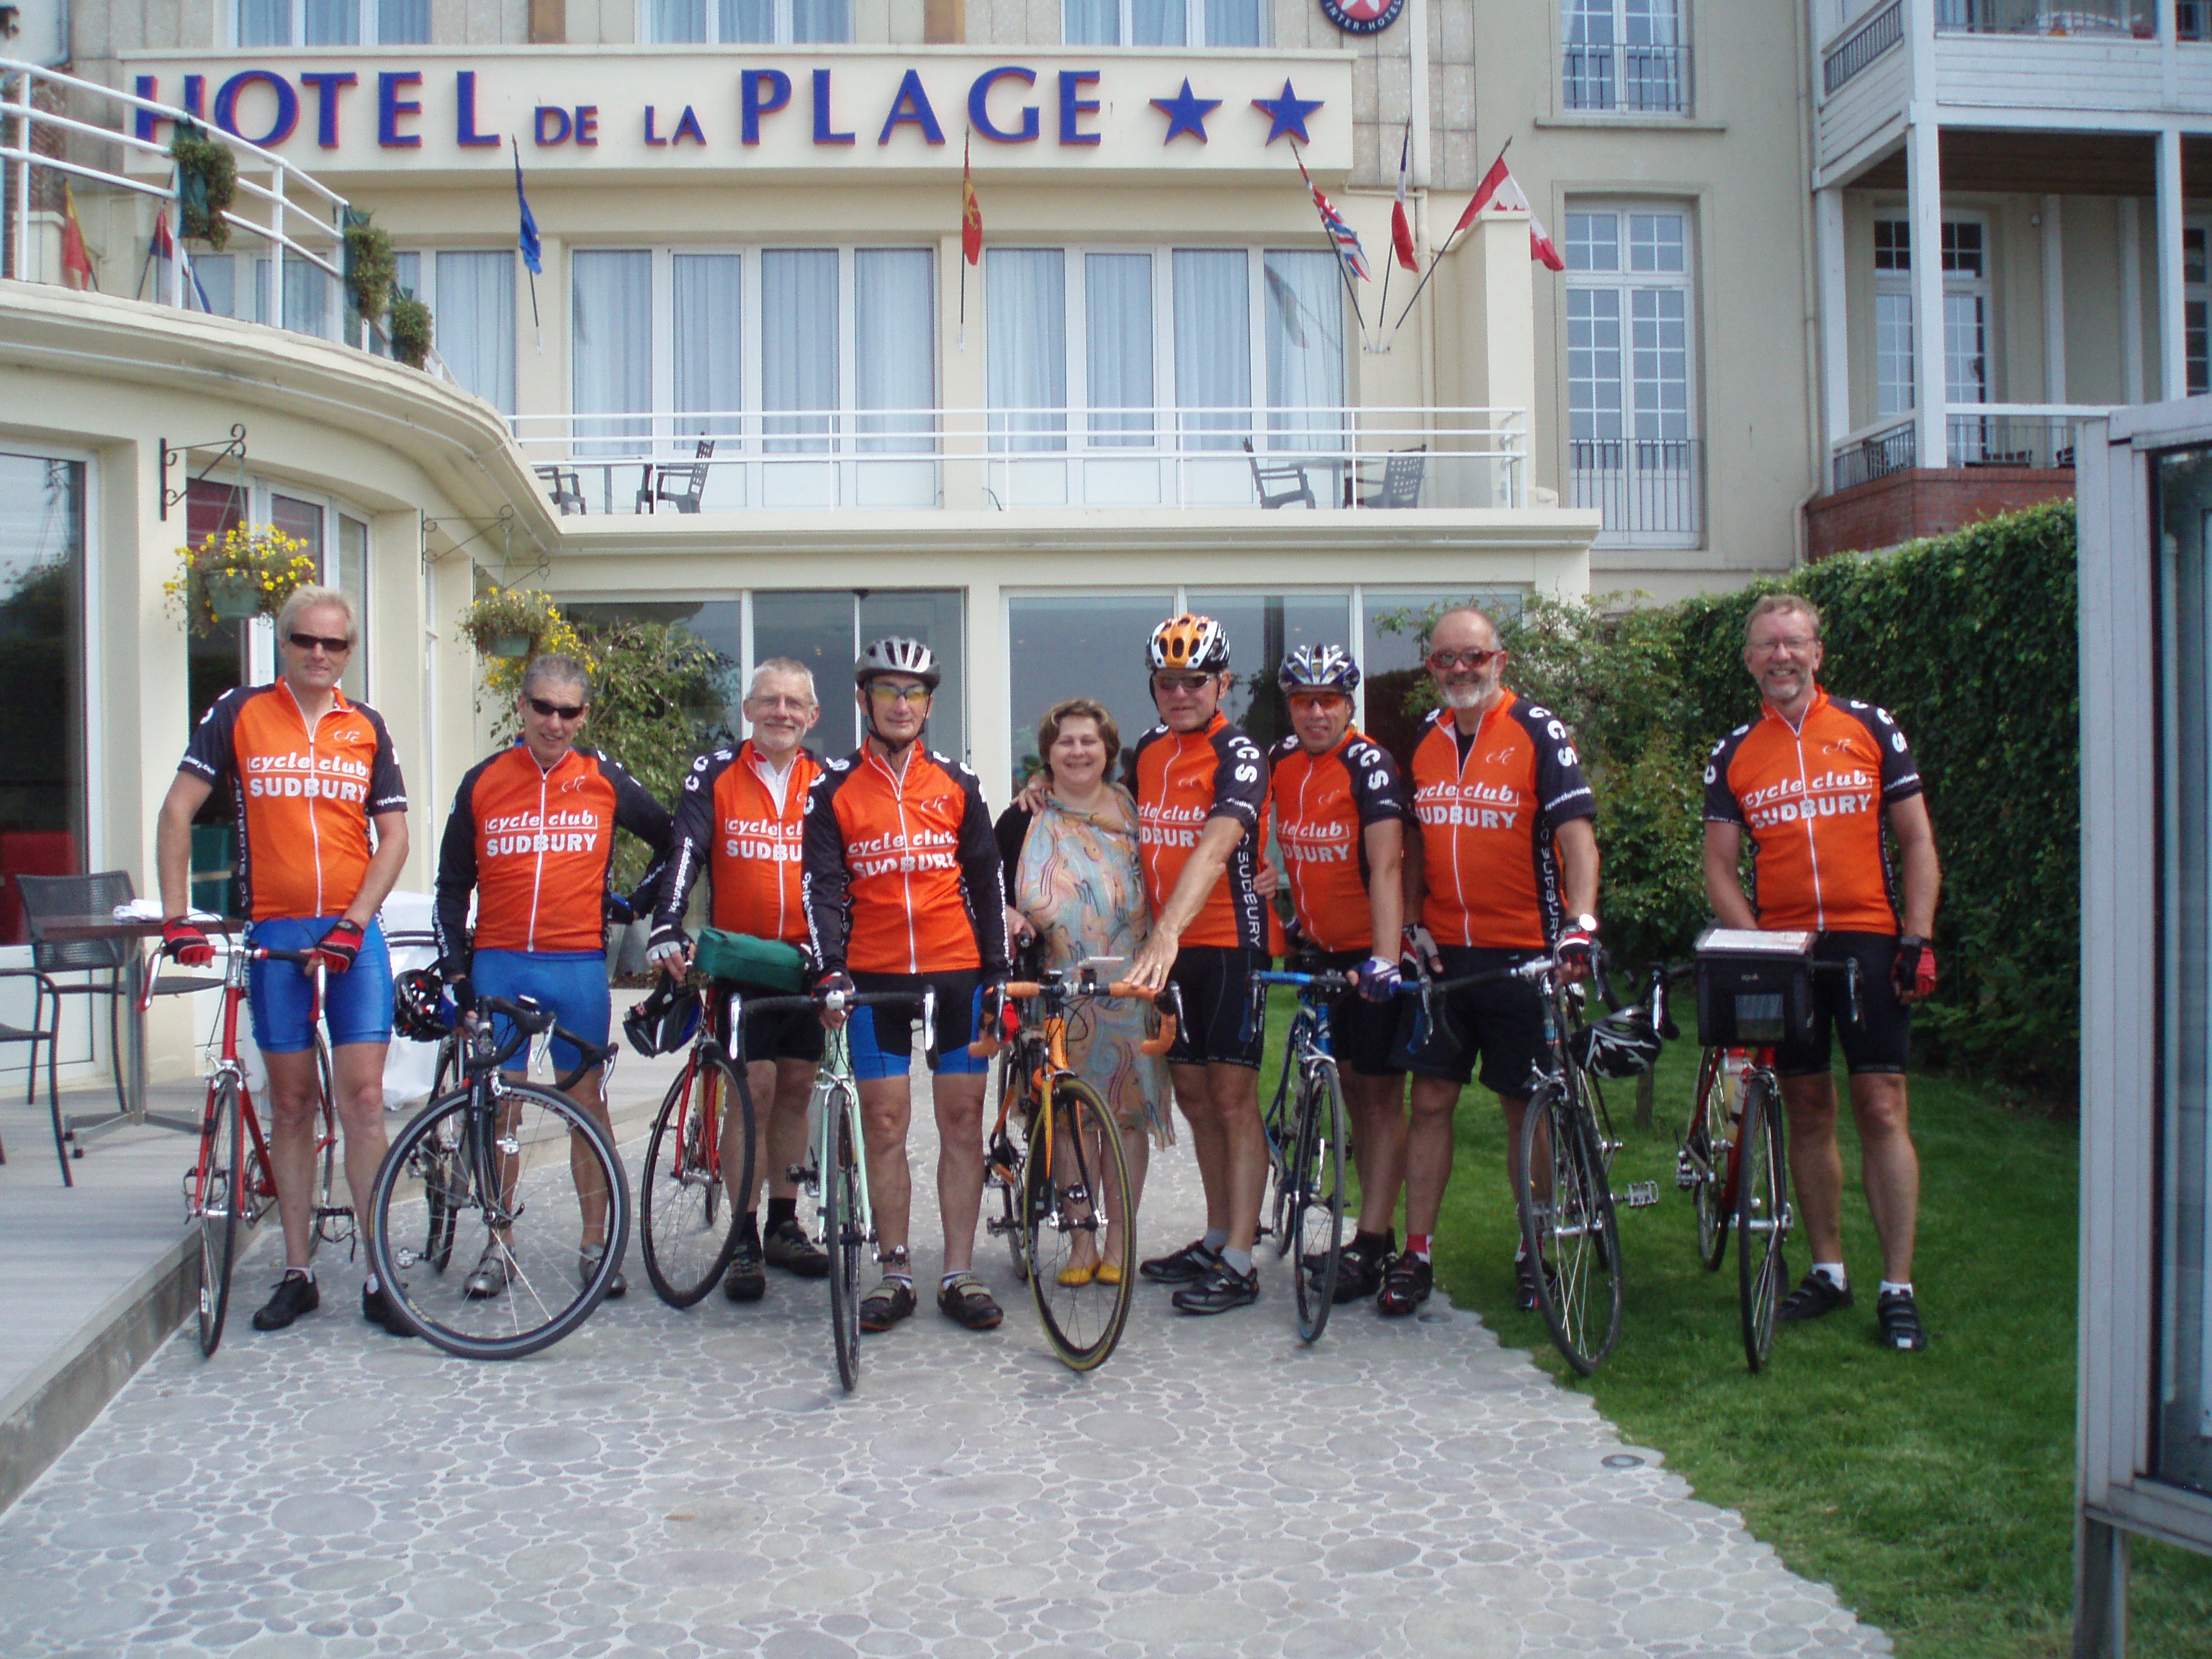 Team CCS, with Isabelle of Hotel de la Plage; she rode the 20k ride.